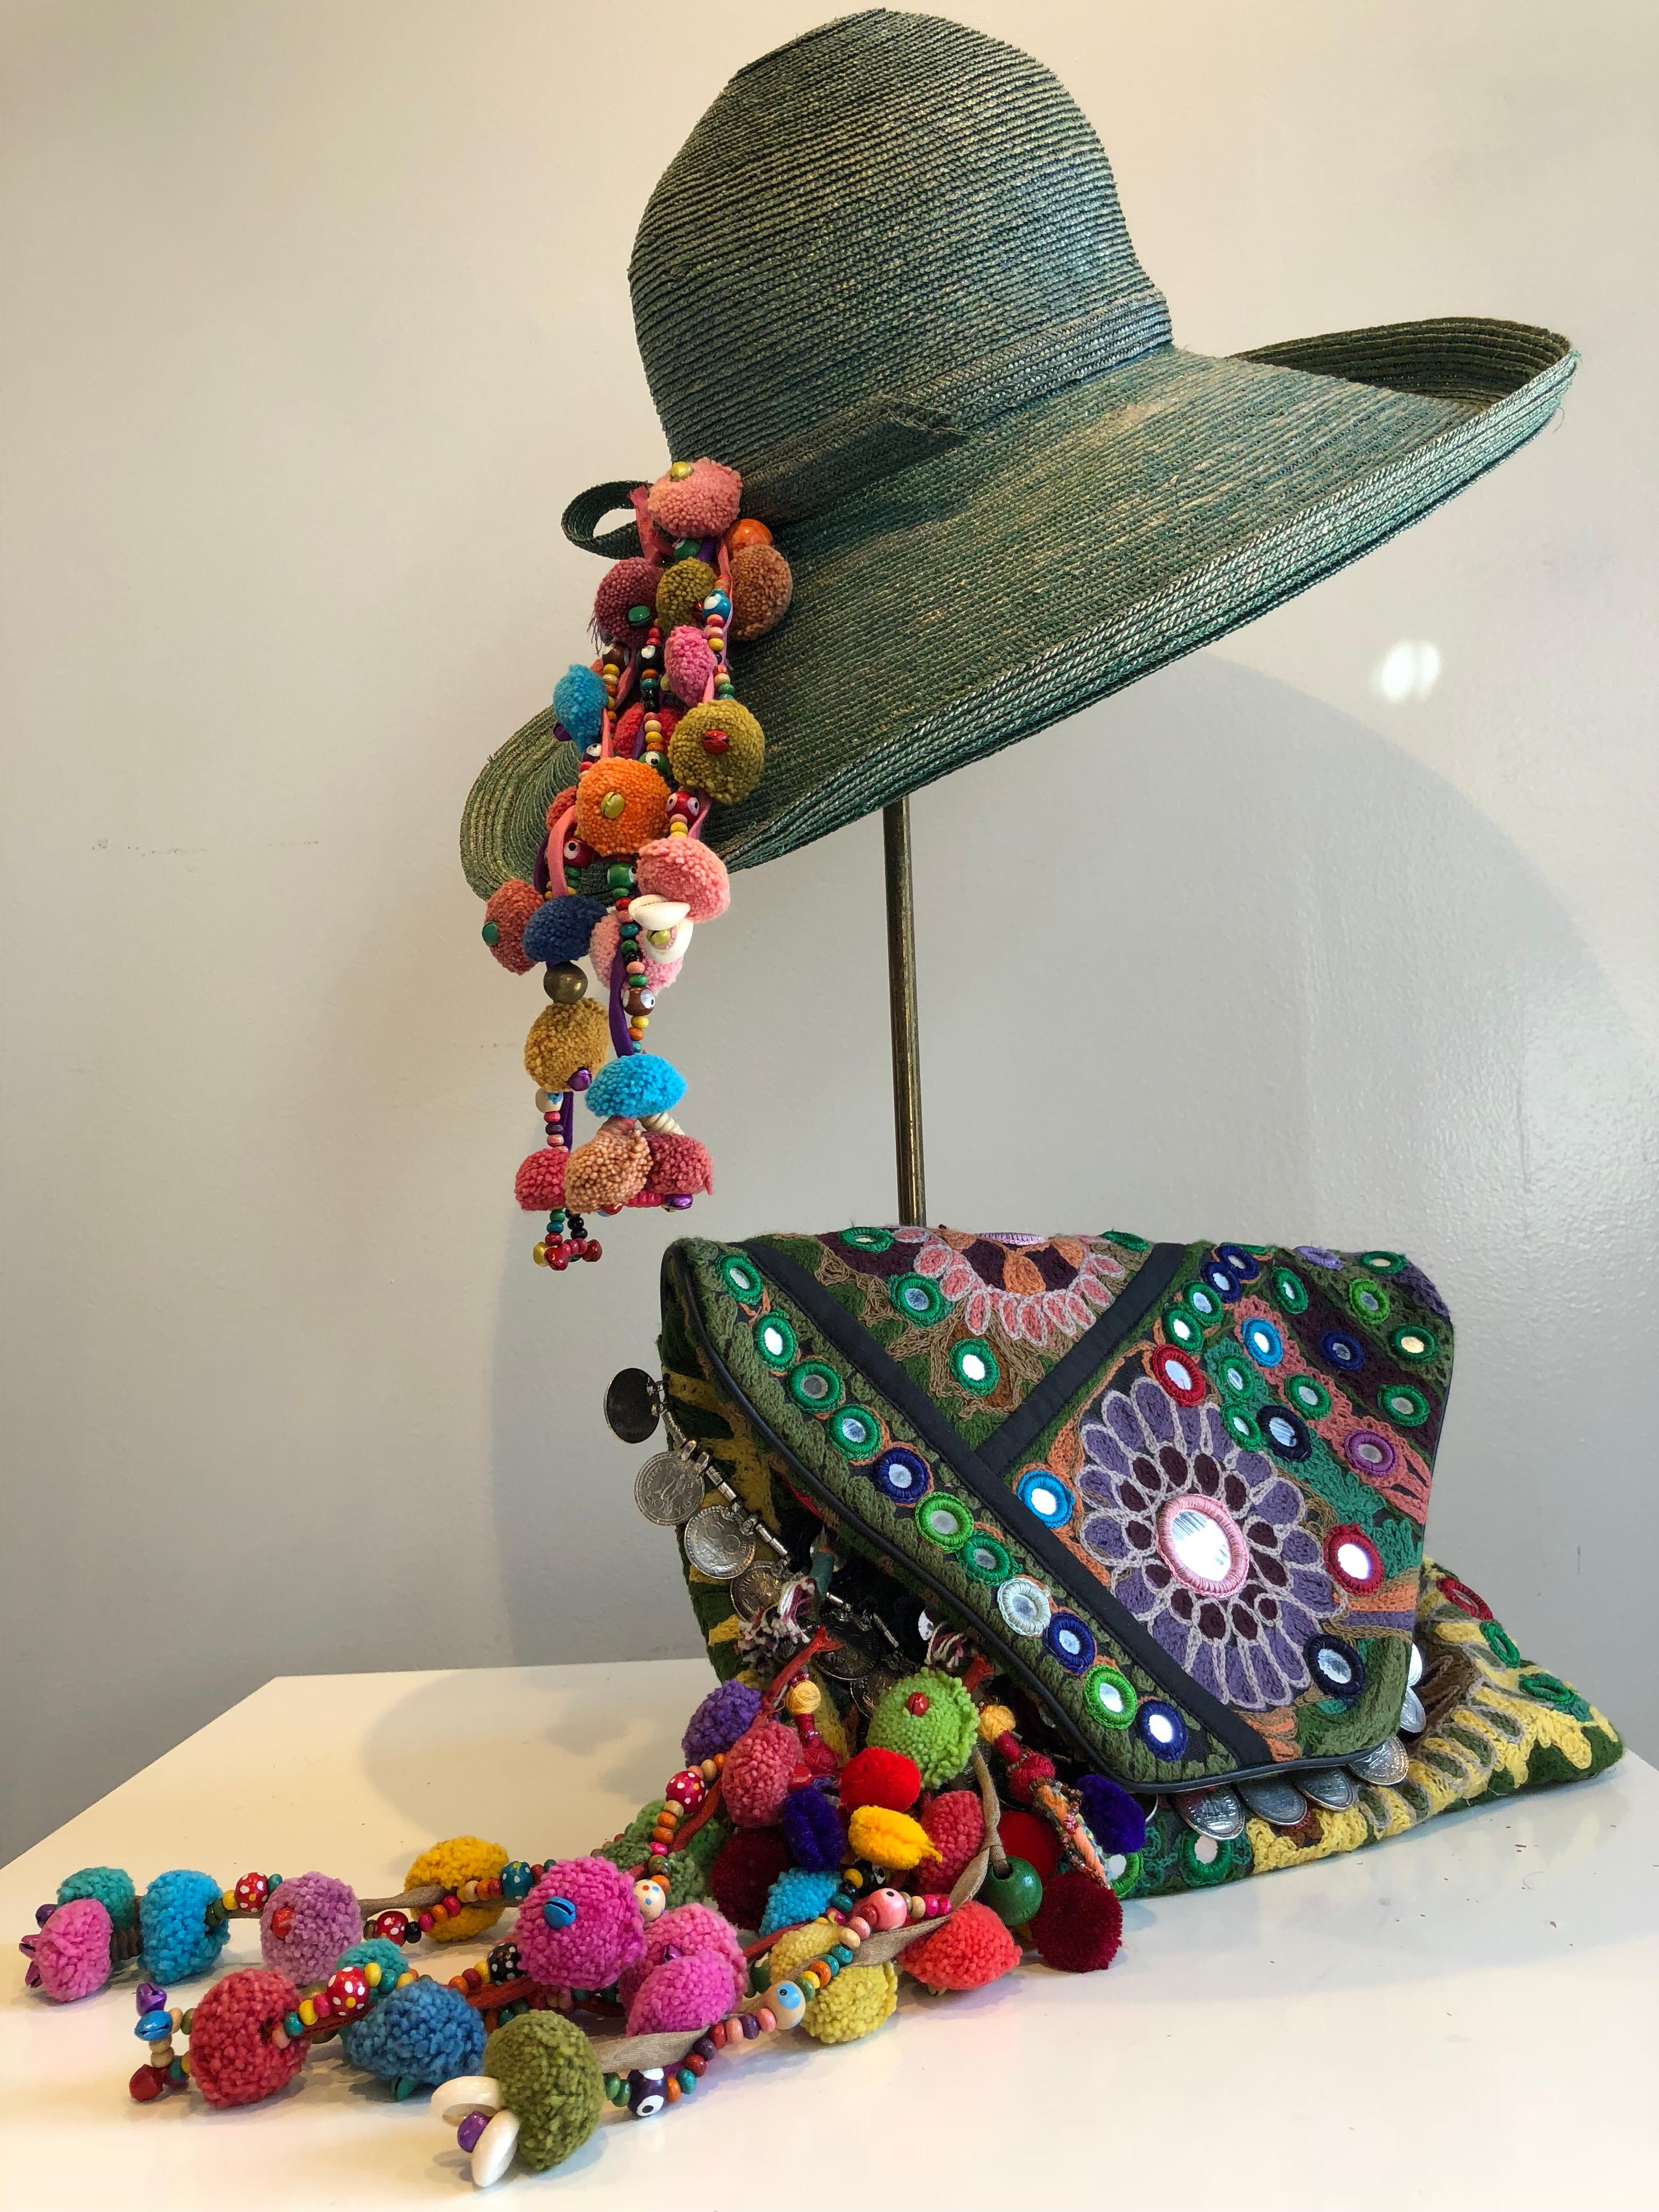 1960s Frank Olive Jade Green Straw Hat & Moroccan Textile Boho Clutch. This 2-piece set starts out with a superb Frank Olive hat in an unusual color and adds a splash of Moroccan-style pom-pom, coin trim and mirror ornamentation on the hat and